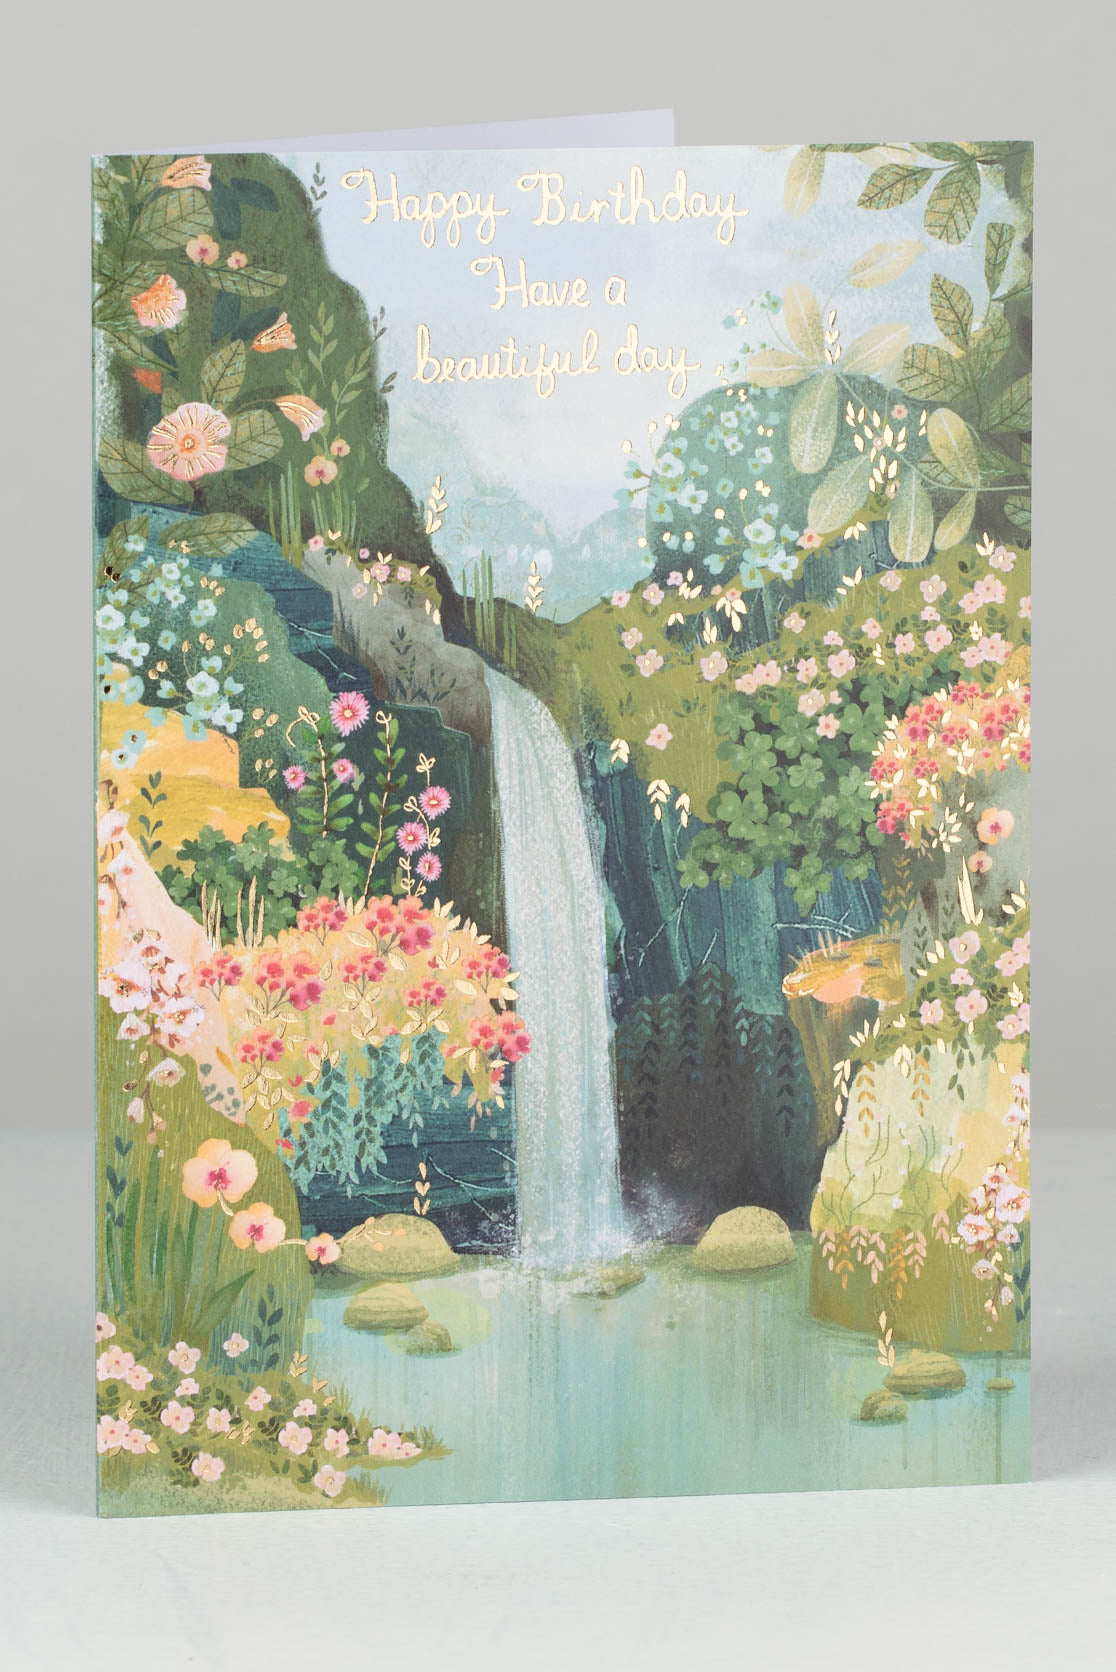 Happy Birthday card with image of a waterfall and flowers